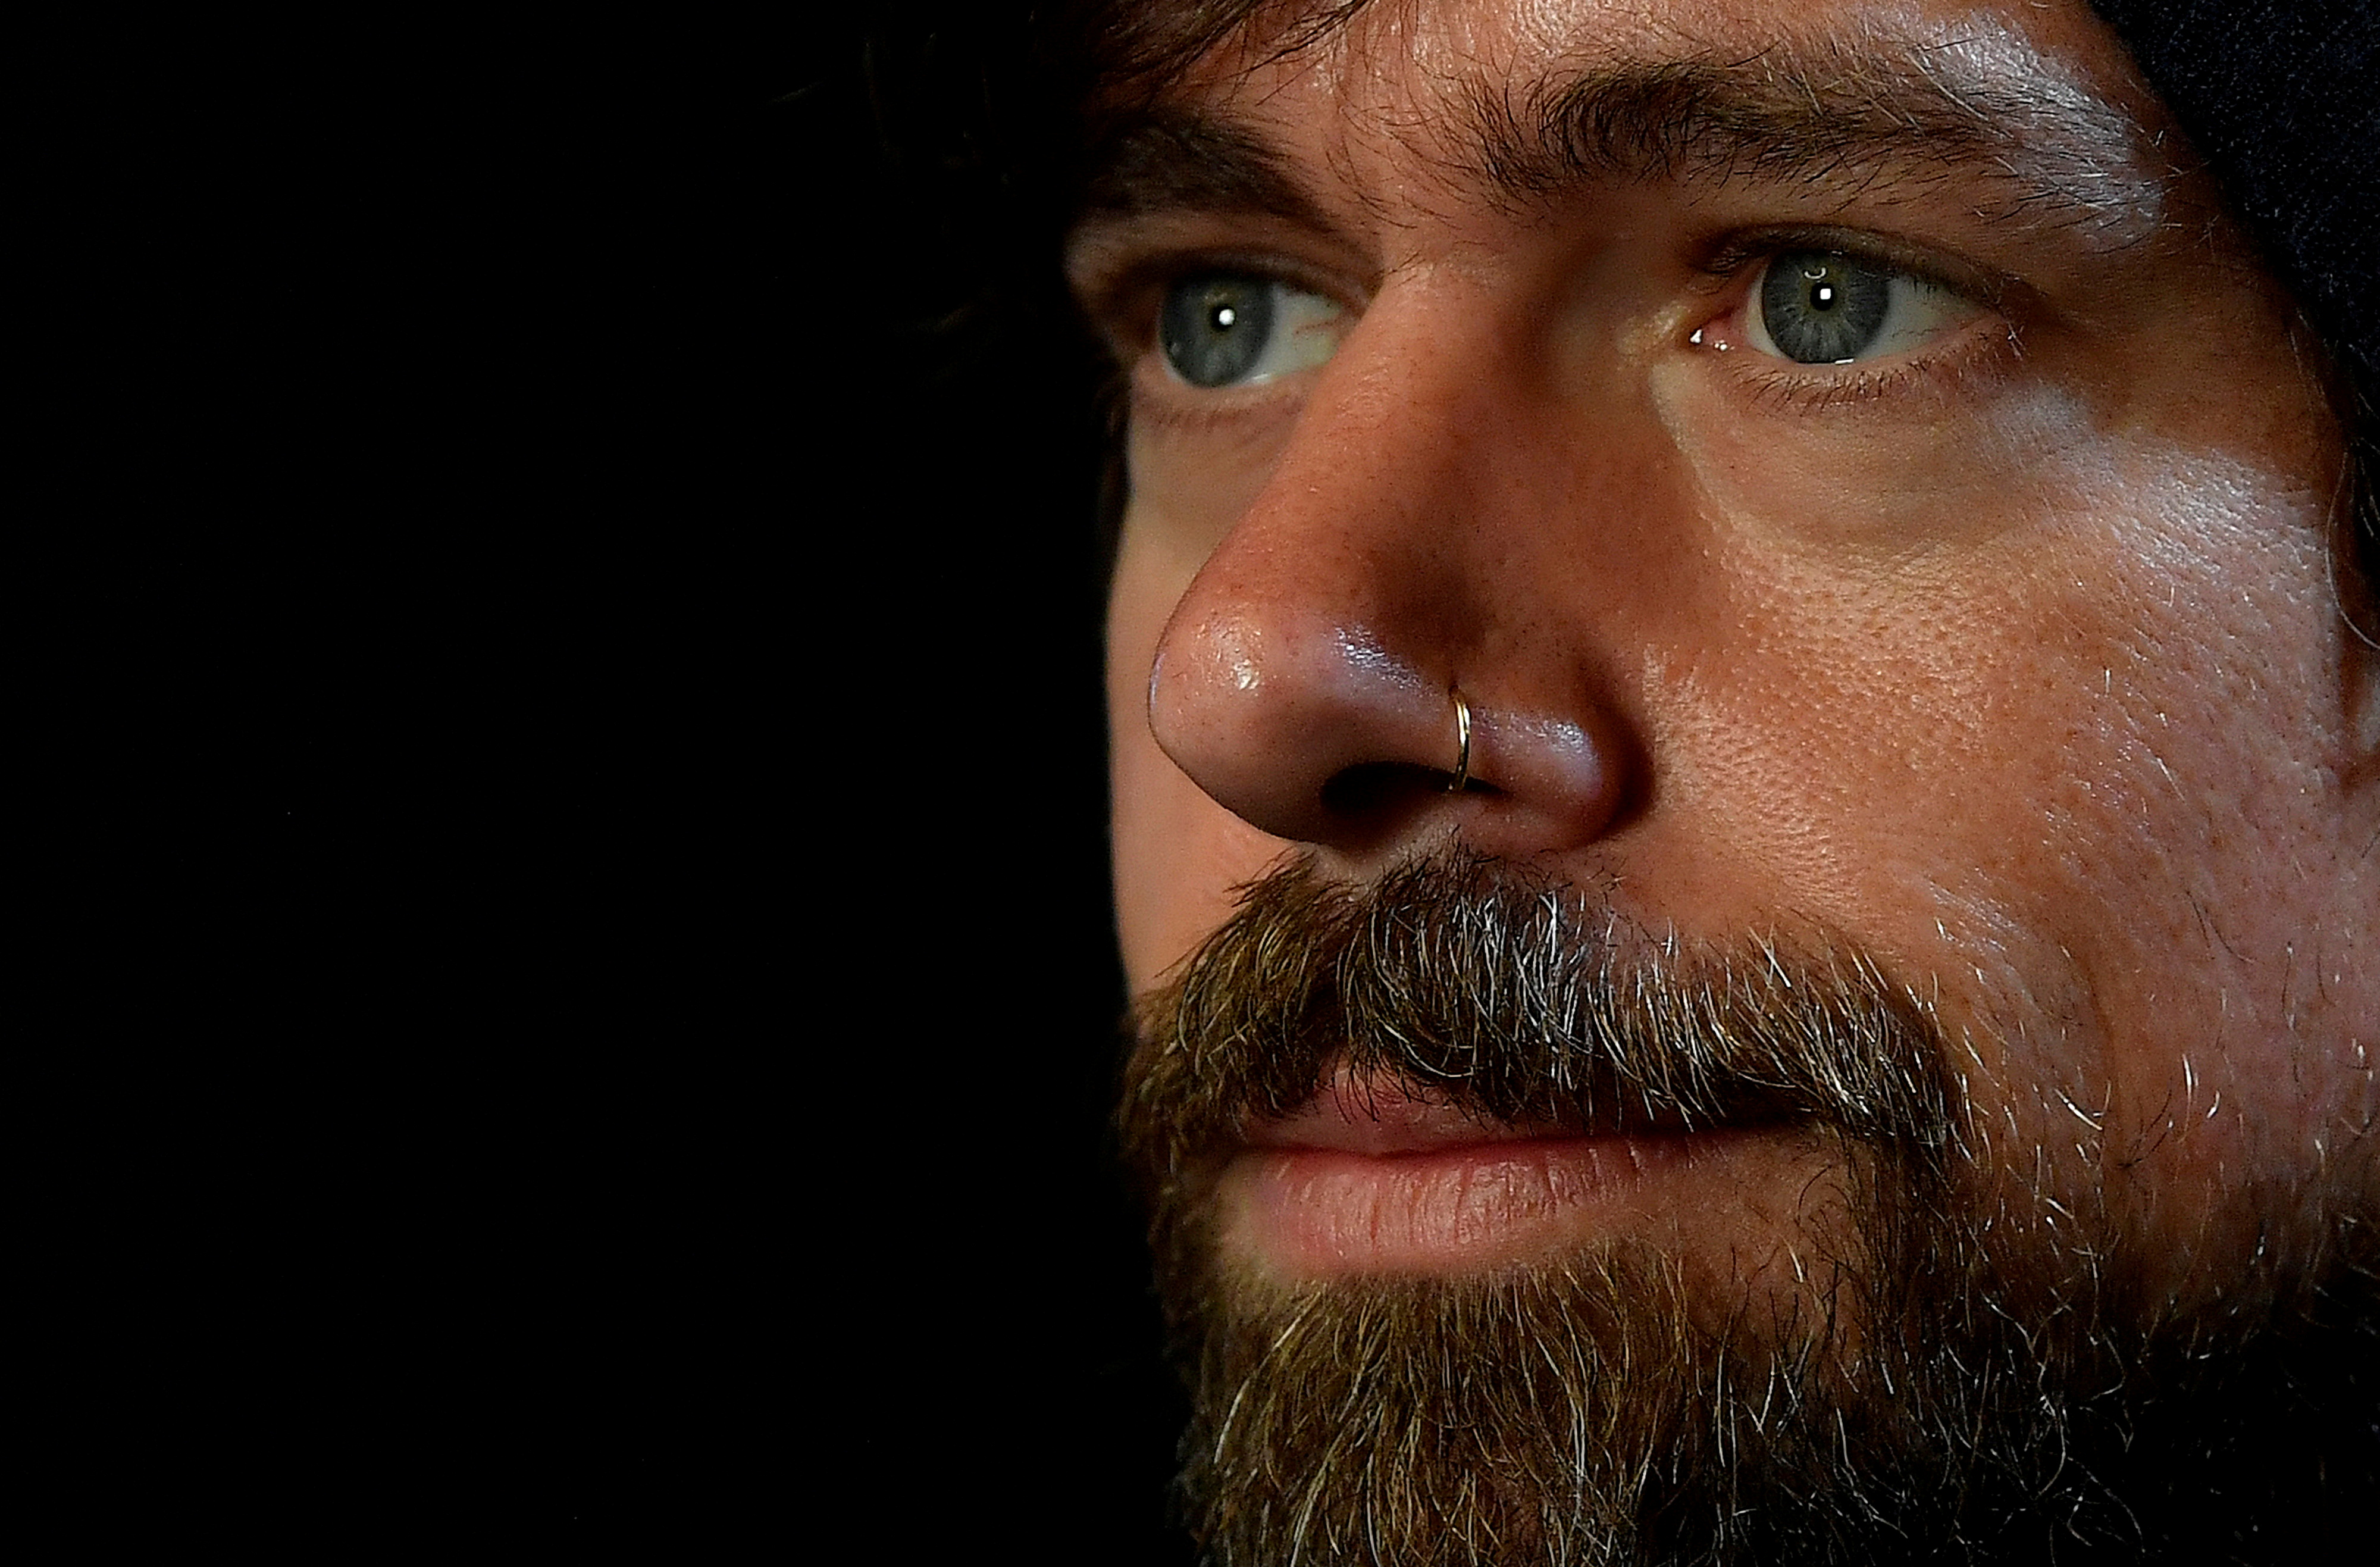 Dorsey, co-founder of Twitter and fintech firm Square, sits for a portrait during an interview with Reuters in London